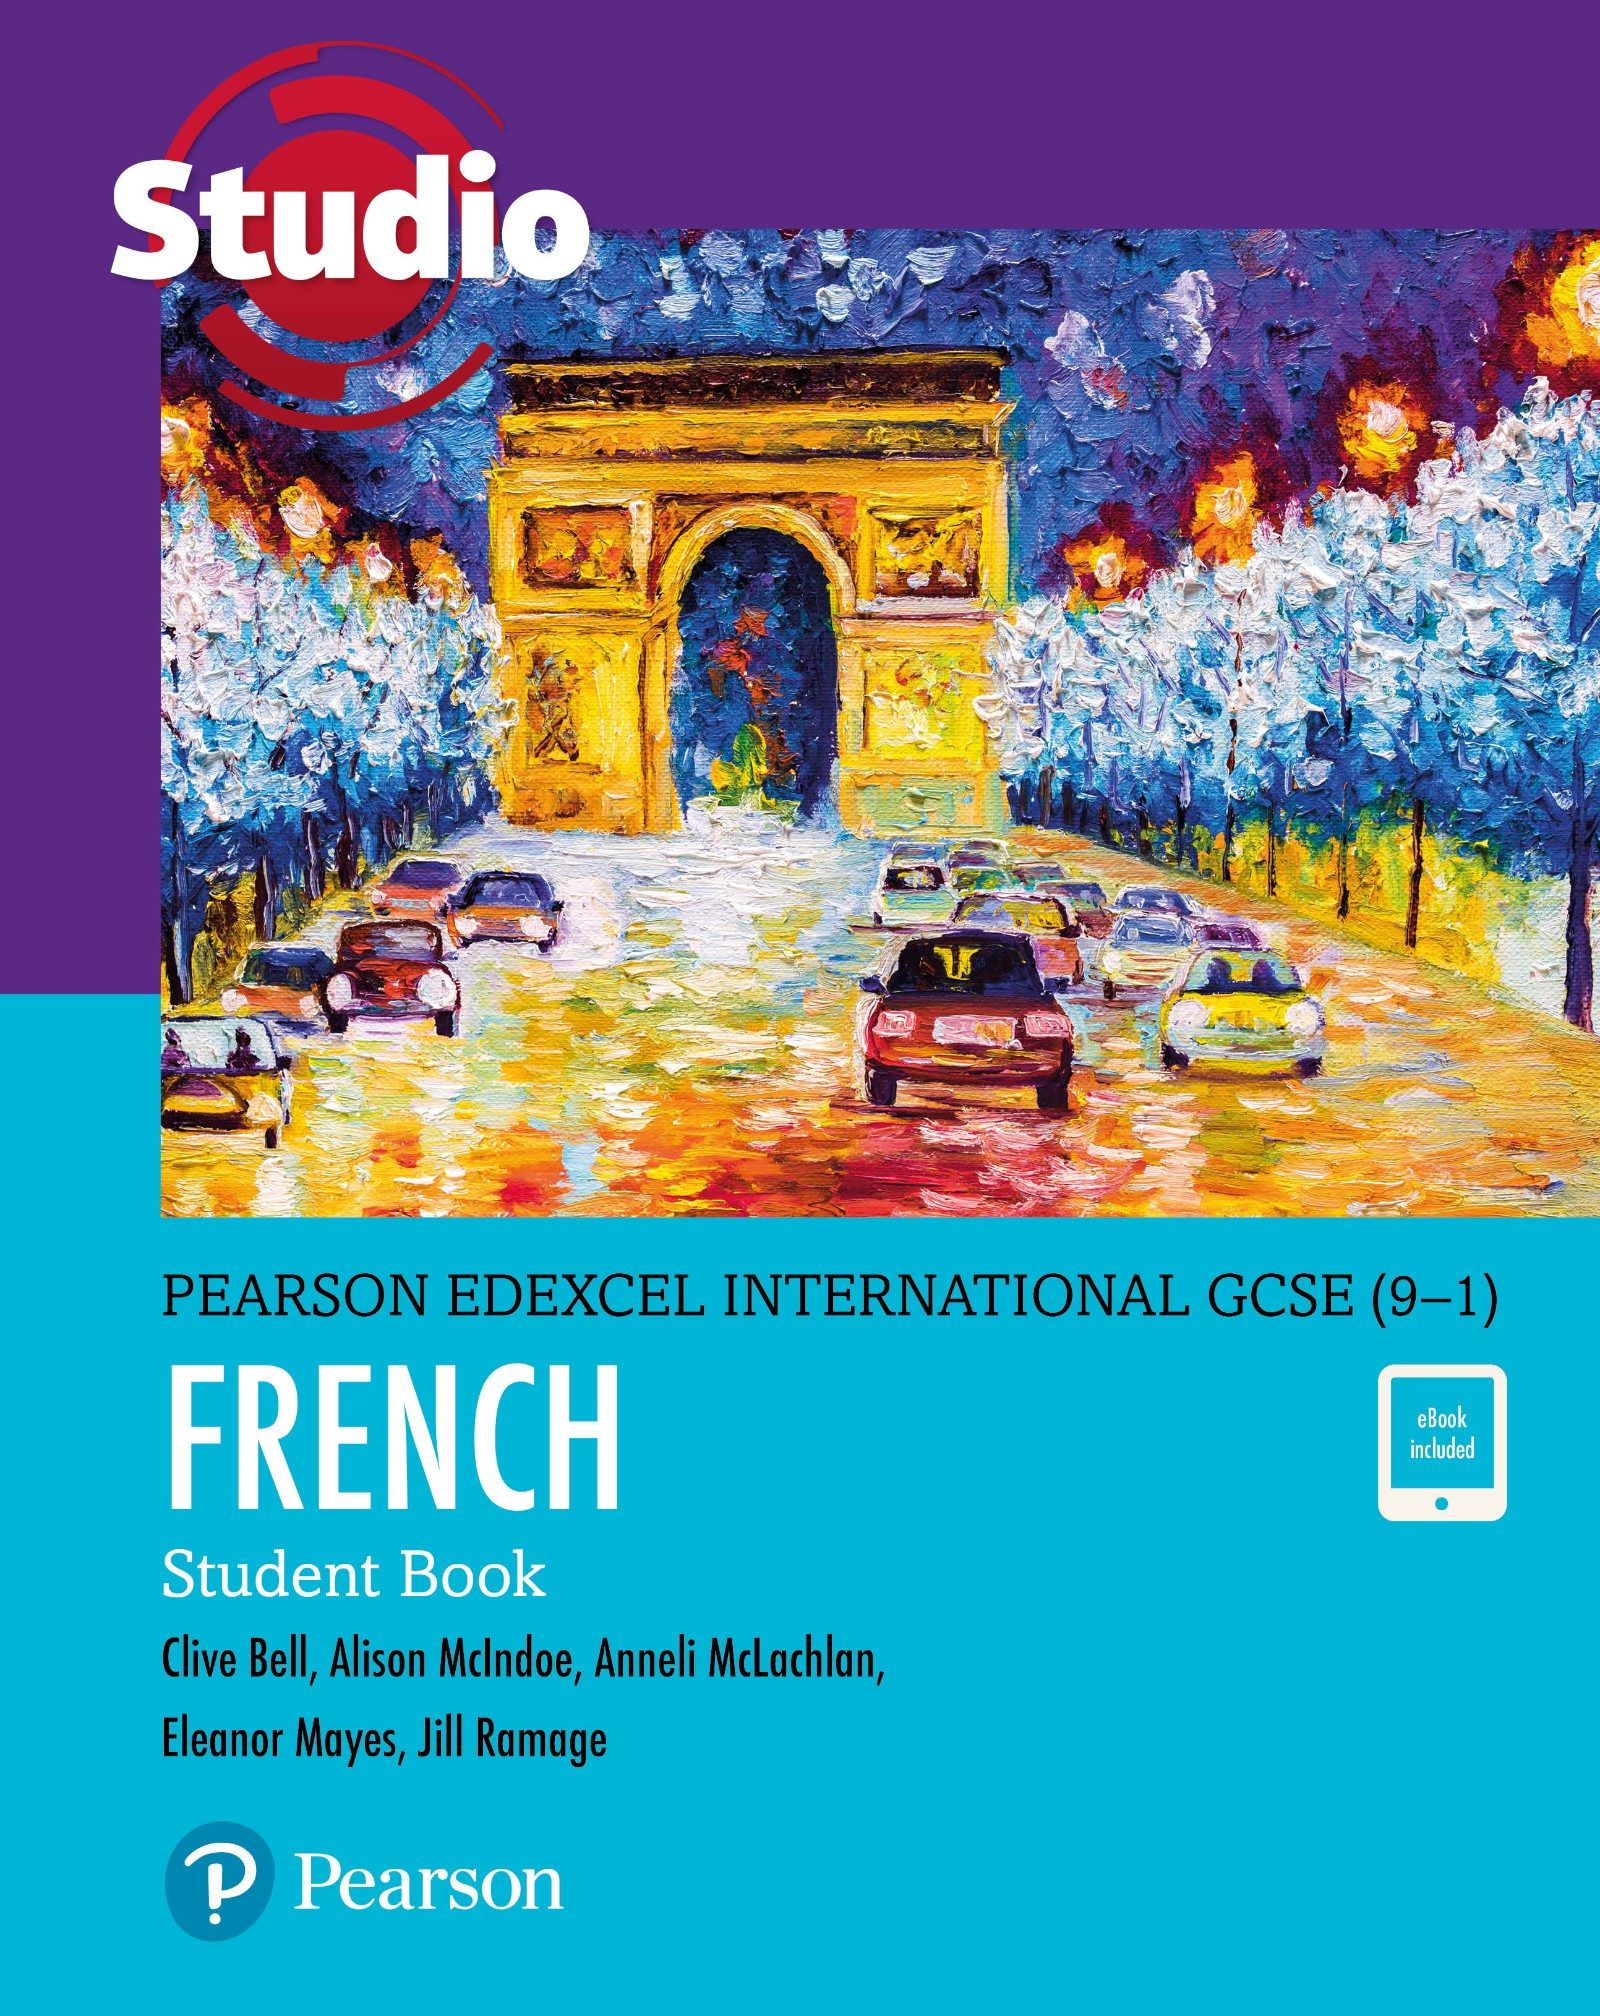 Featured image for “Pearson Edexcel International GCSE (9–1) French”